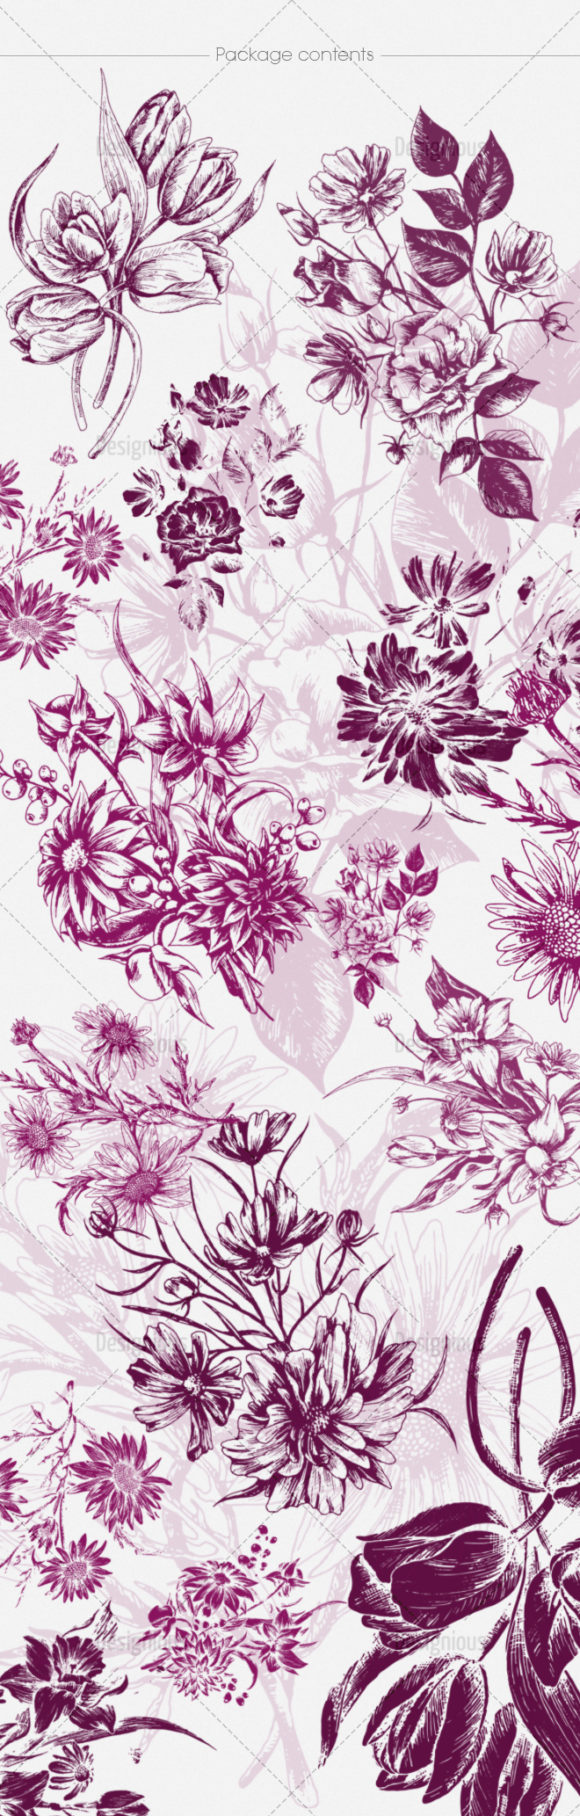 Floral Brushes Pack 42 2